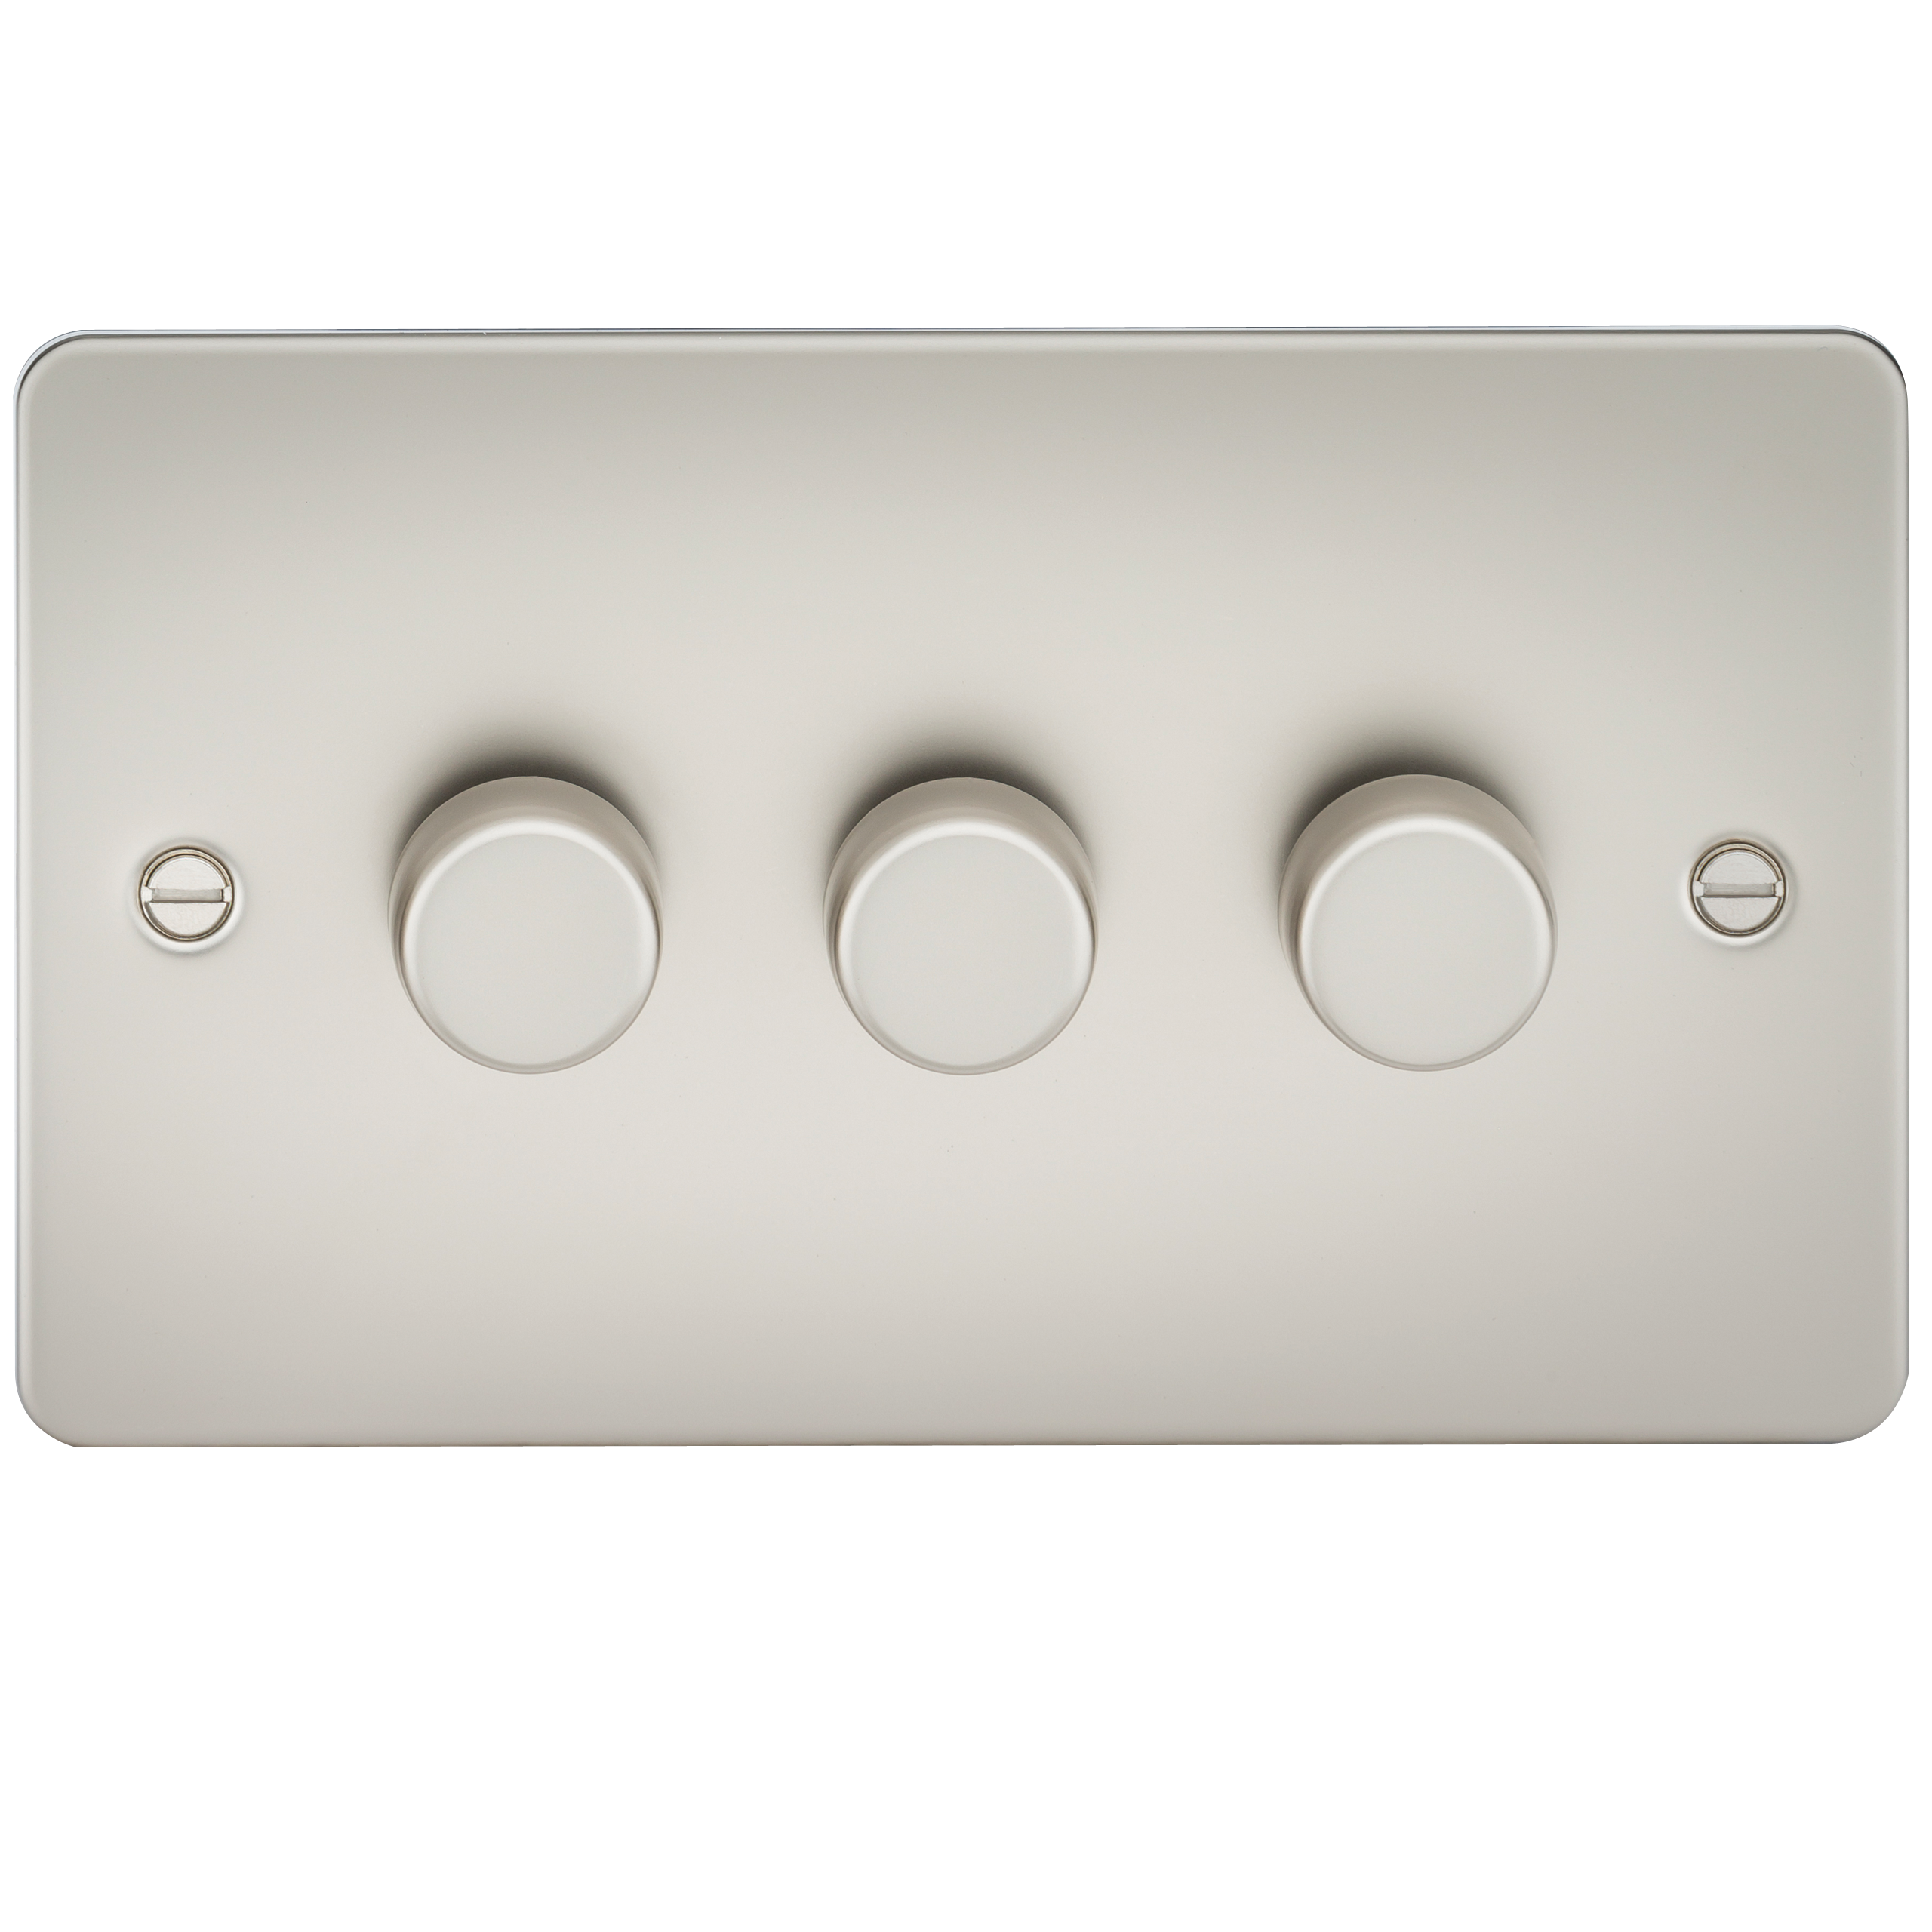 FLAT PLATE 3G 2 WAY 40-400W DIMMER - PEARL - FP2173PL 